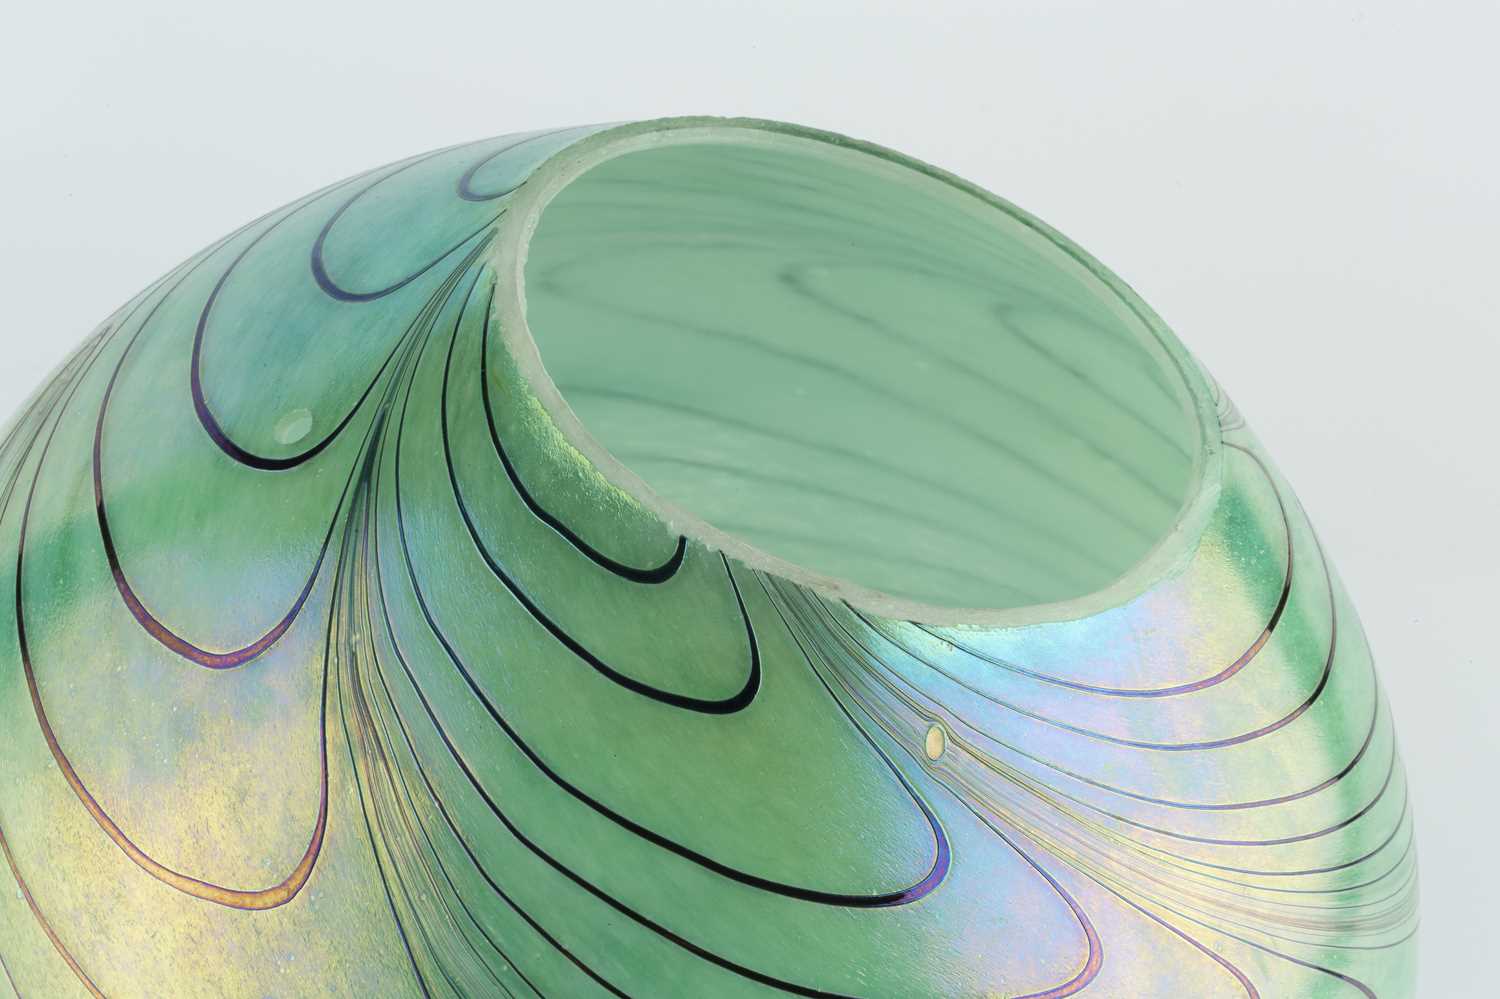 Lino Tagliapietra (b.1934) Art glass table lamp swirled green and white glass with black lines - Image 3 of 3